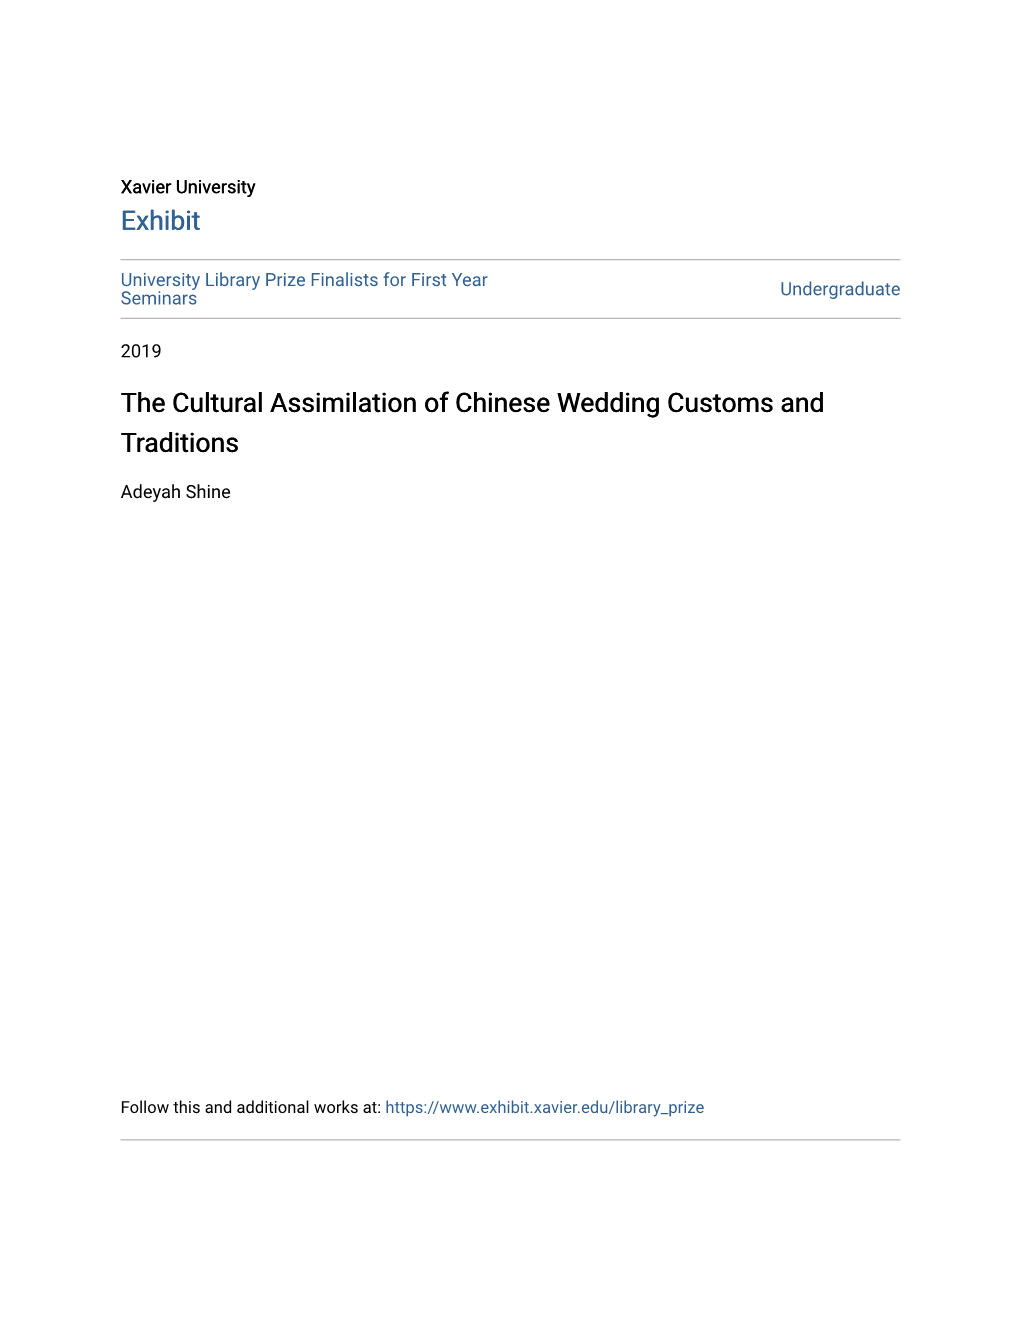 The Cultural Assimilation of Chinese Wedding Customs and Traditions